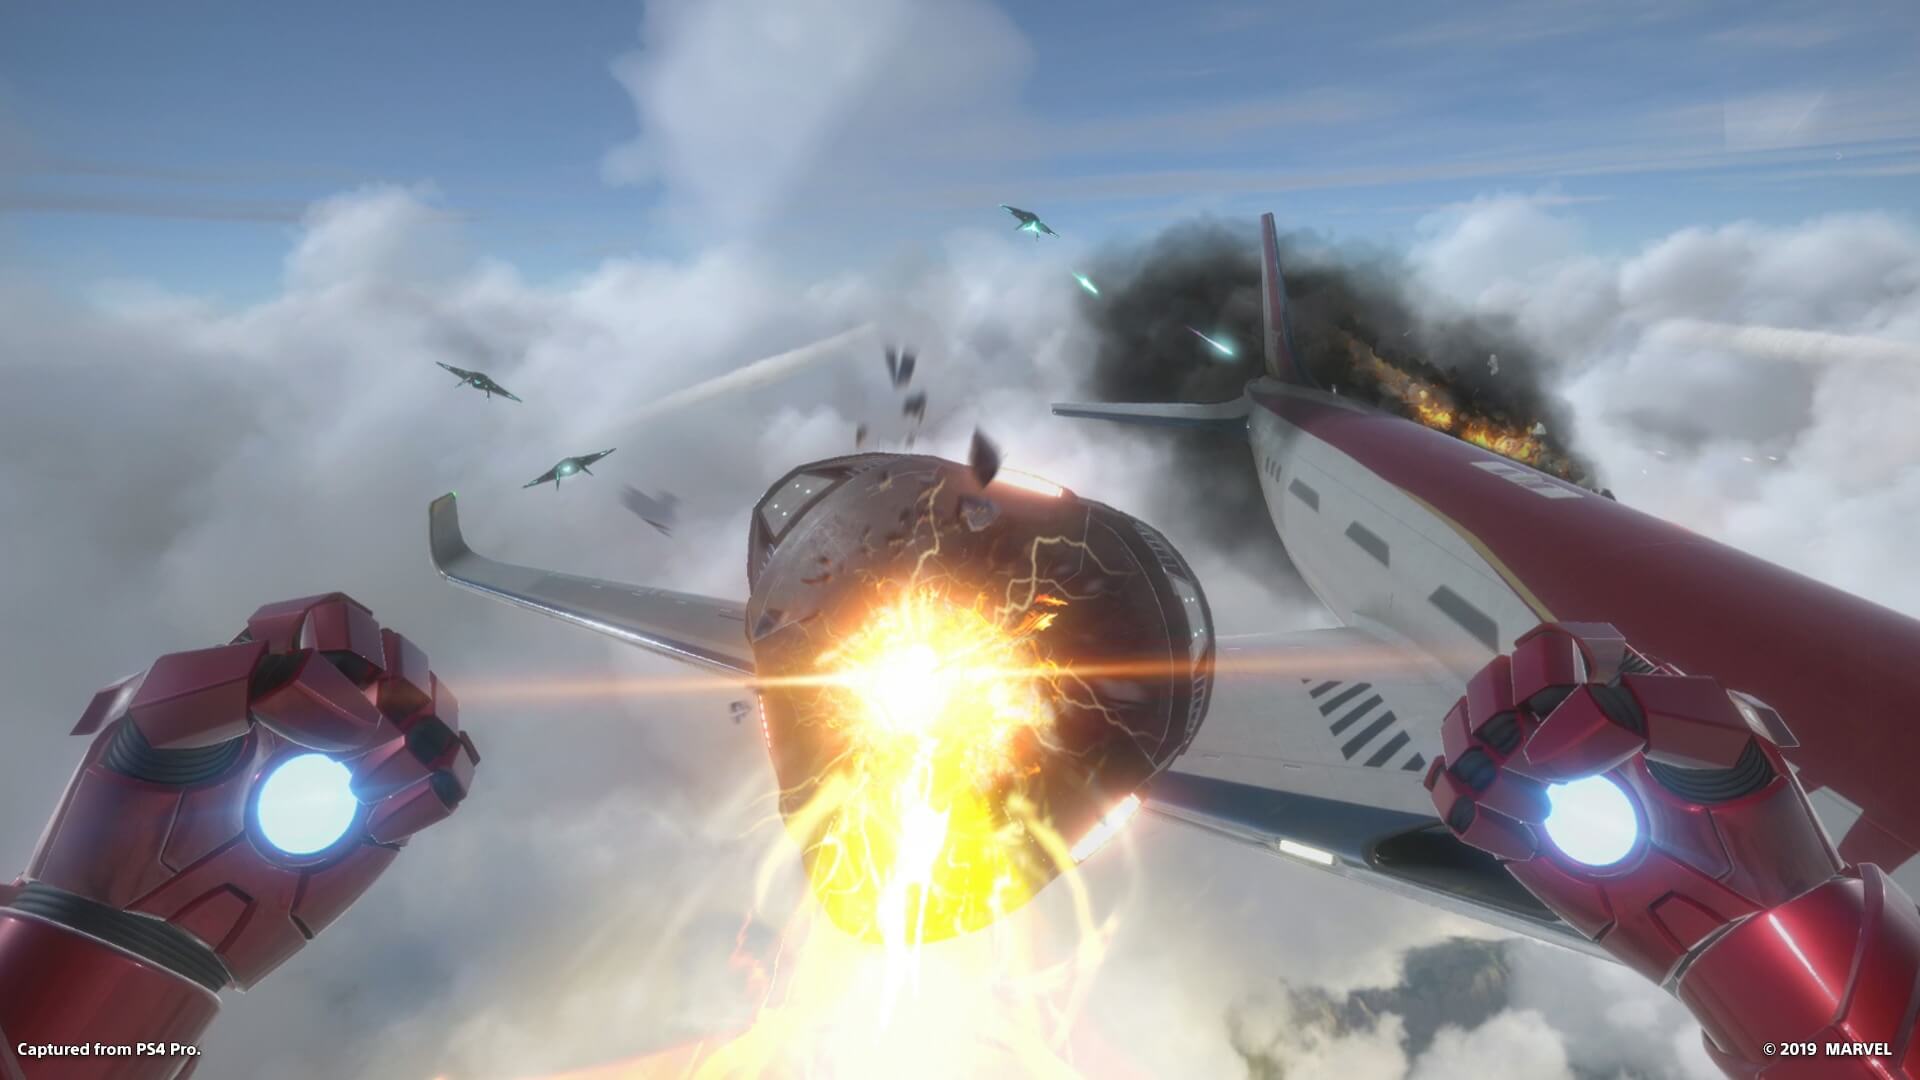 Iron Man bringing down a flying craft in the Iron Man game Iron Man VR